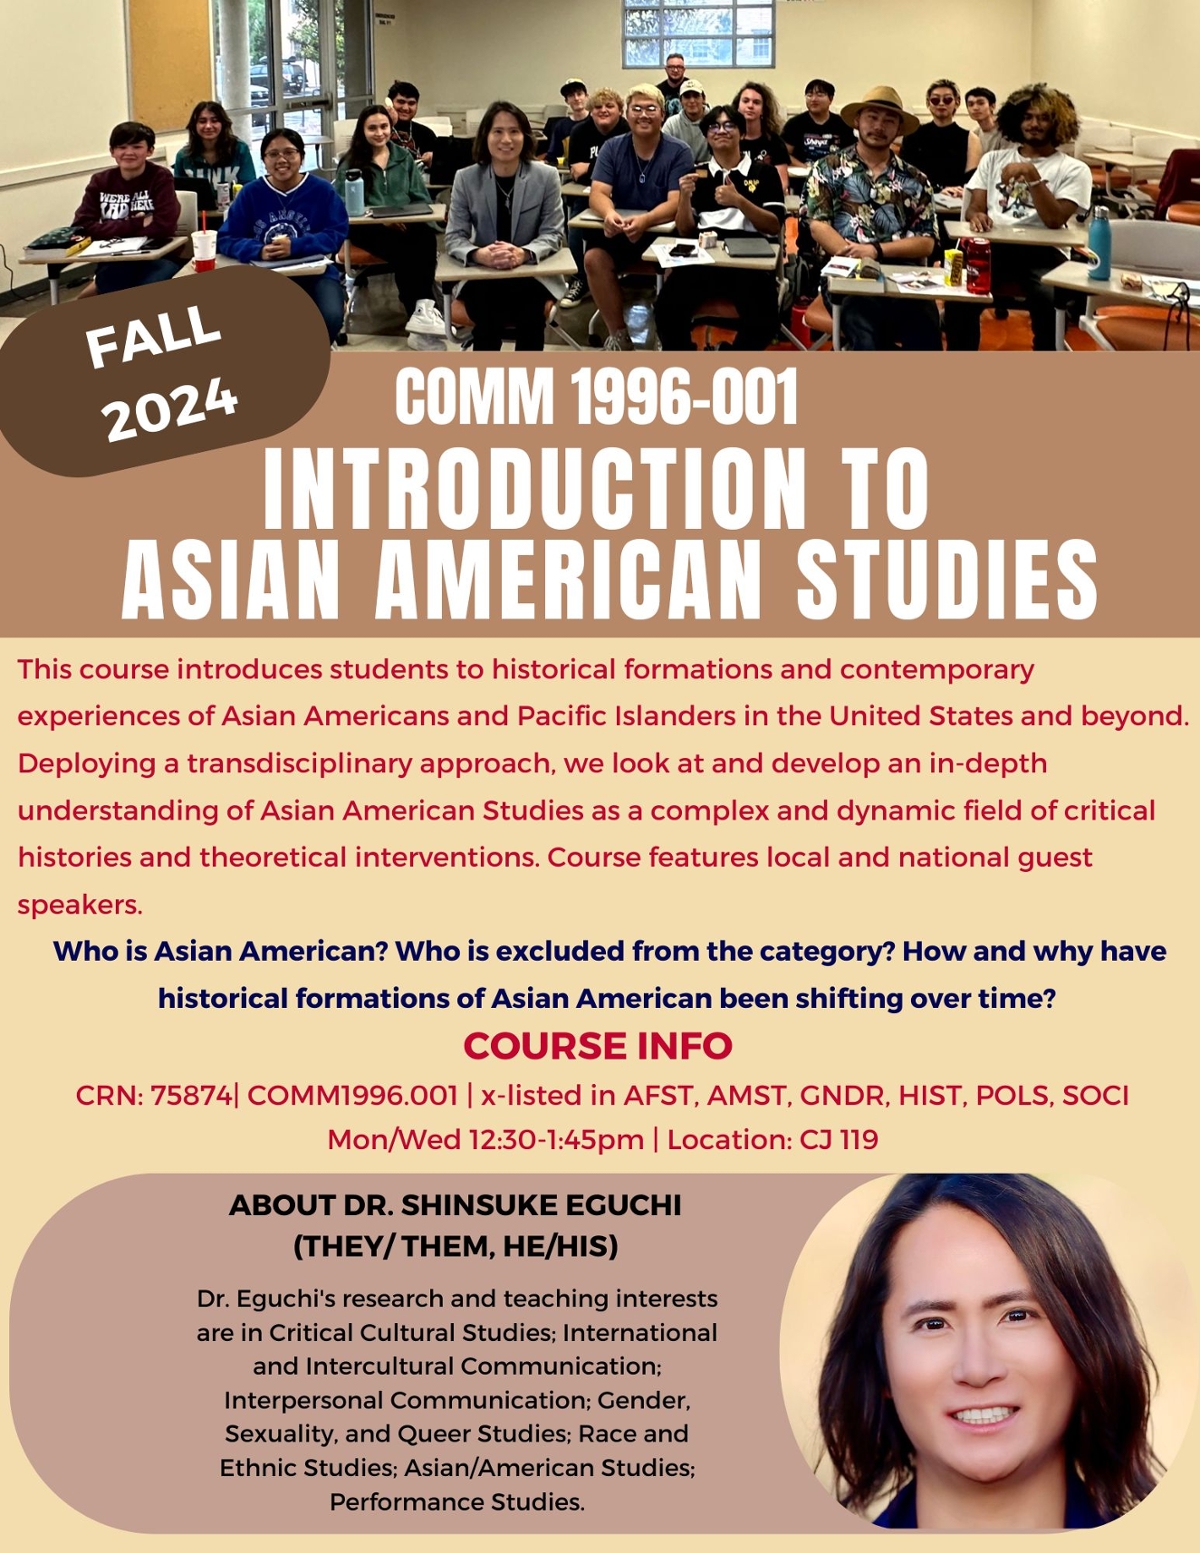 Introduction to Asian American Studies Course, Fall 2024